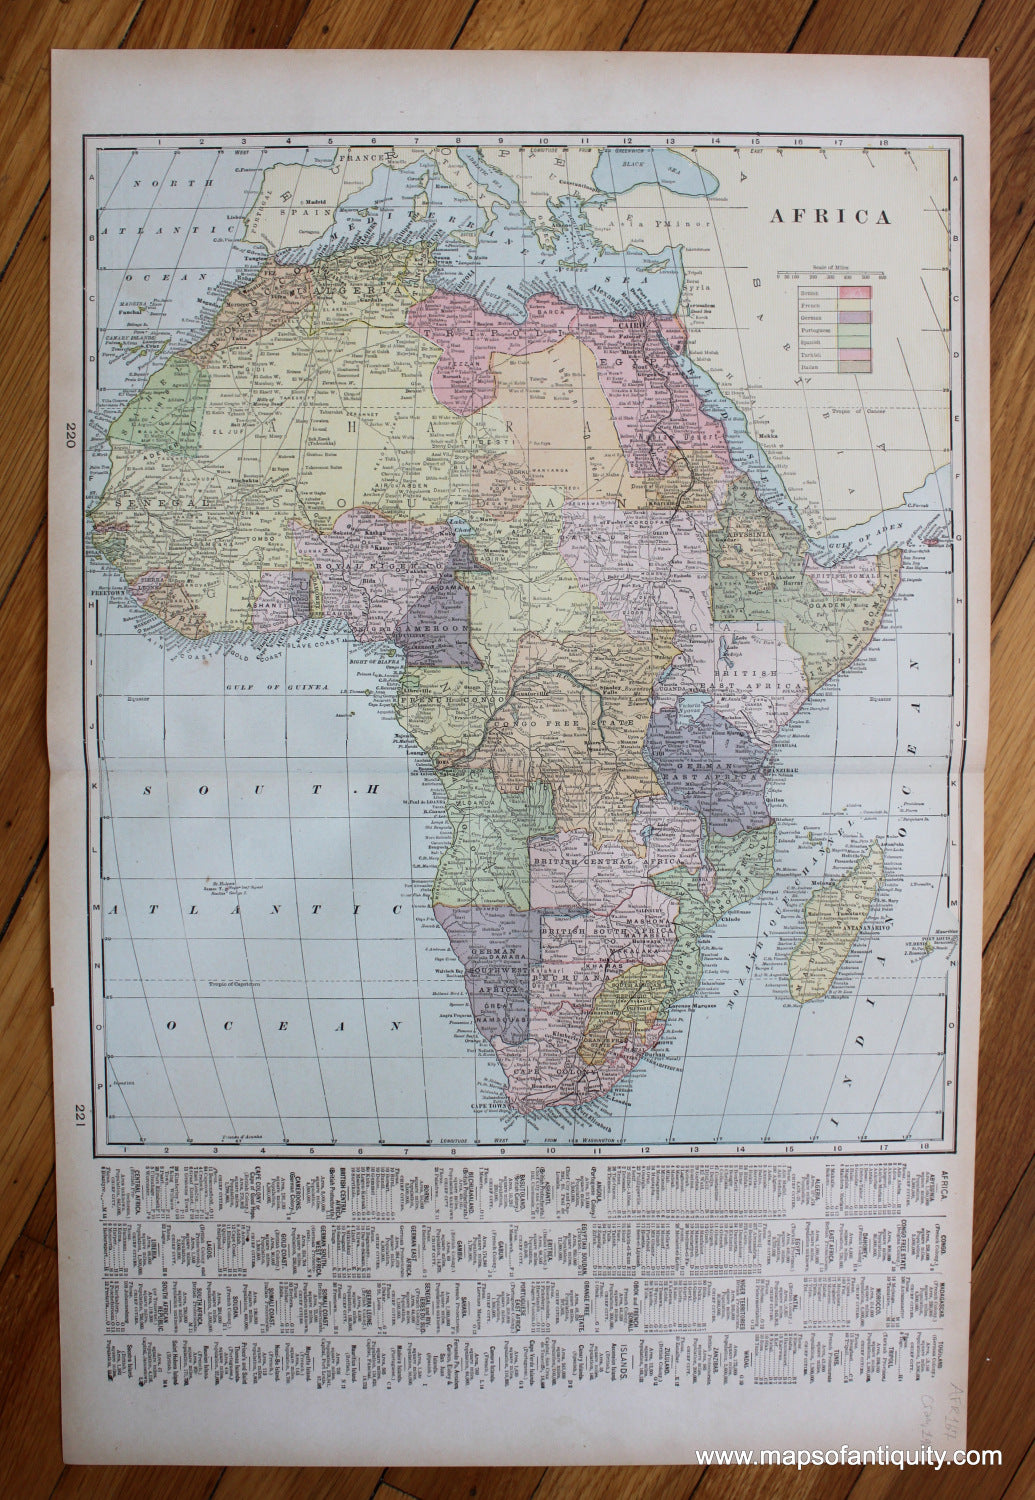 Antique-Printed-Color-Map-Africa-verso:-Northwest-Africa-Morocco-Algeria-and-Tunis-and-Northeast-Africa-Egypt-Abyssinia-Eritrea-and-Egyptian-Soudan-Africa-Africa-General-North-Africa-1900-Cram-Maps-Of-Antiquity